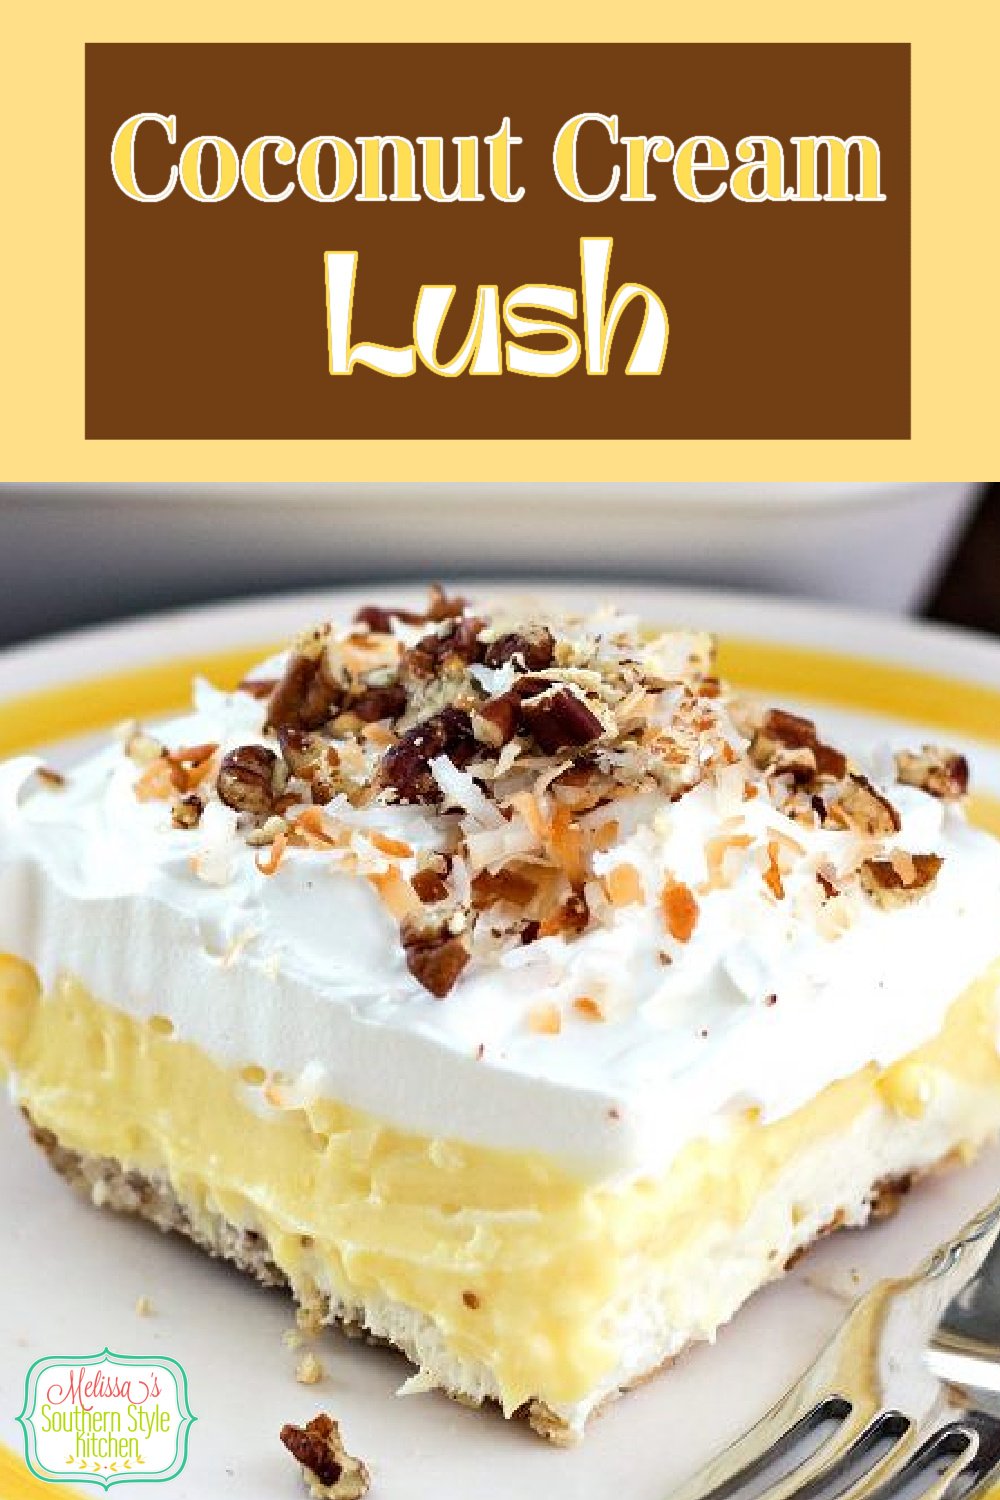 This dreamy Coconut Cream Lush is delicious to the very last spoonful #coconutcream #coconutdesserts #coconutcreamlush #lushdesserts #coconut #desserts #dessertfoodrecipes #holidaydesserts #southernfood #southernrecipes #melissassouthernstylekitchen